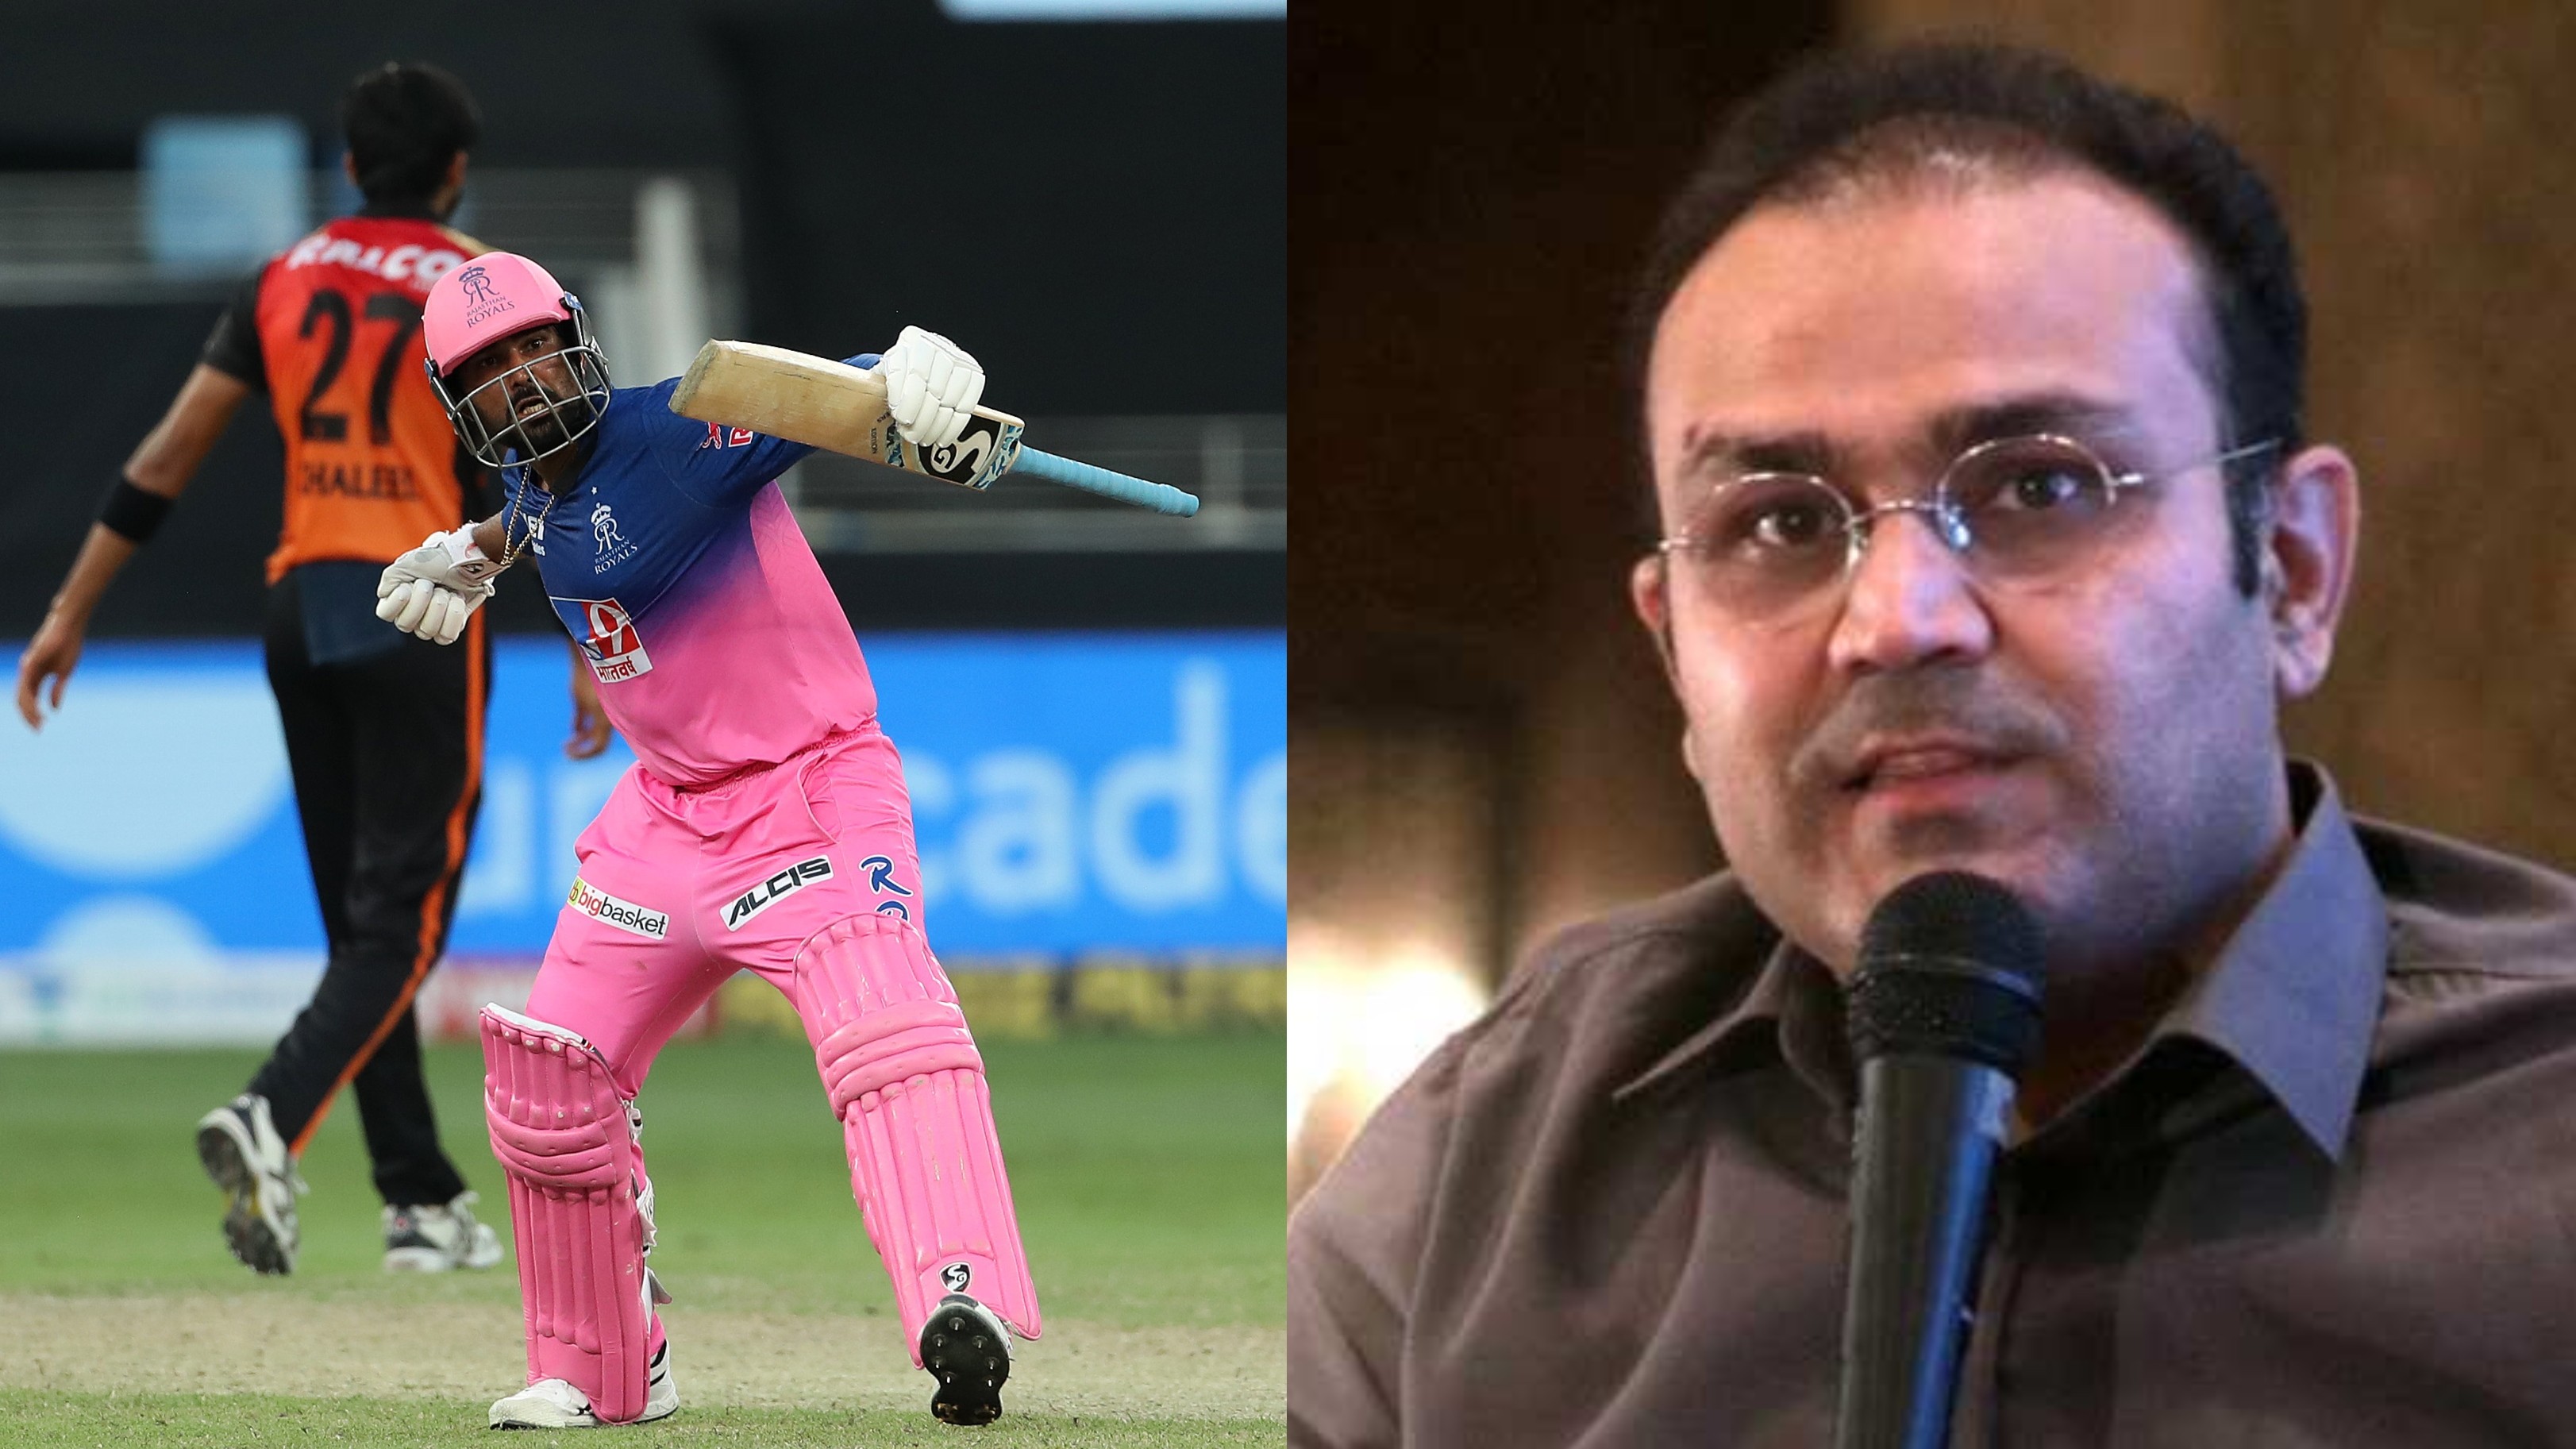  IPL 2020: 'Singham' Tewatia can snatch victory from the jaws of defeat, says Virender Sehwag